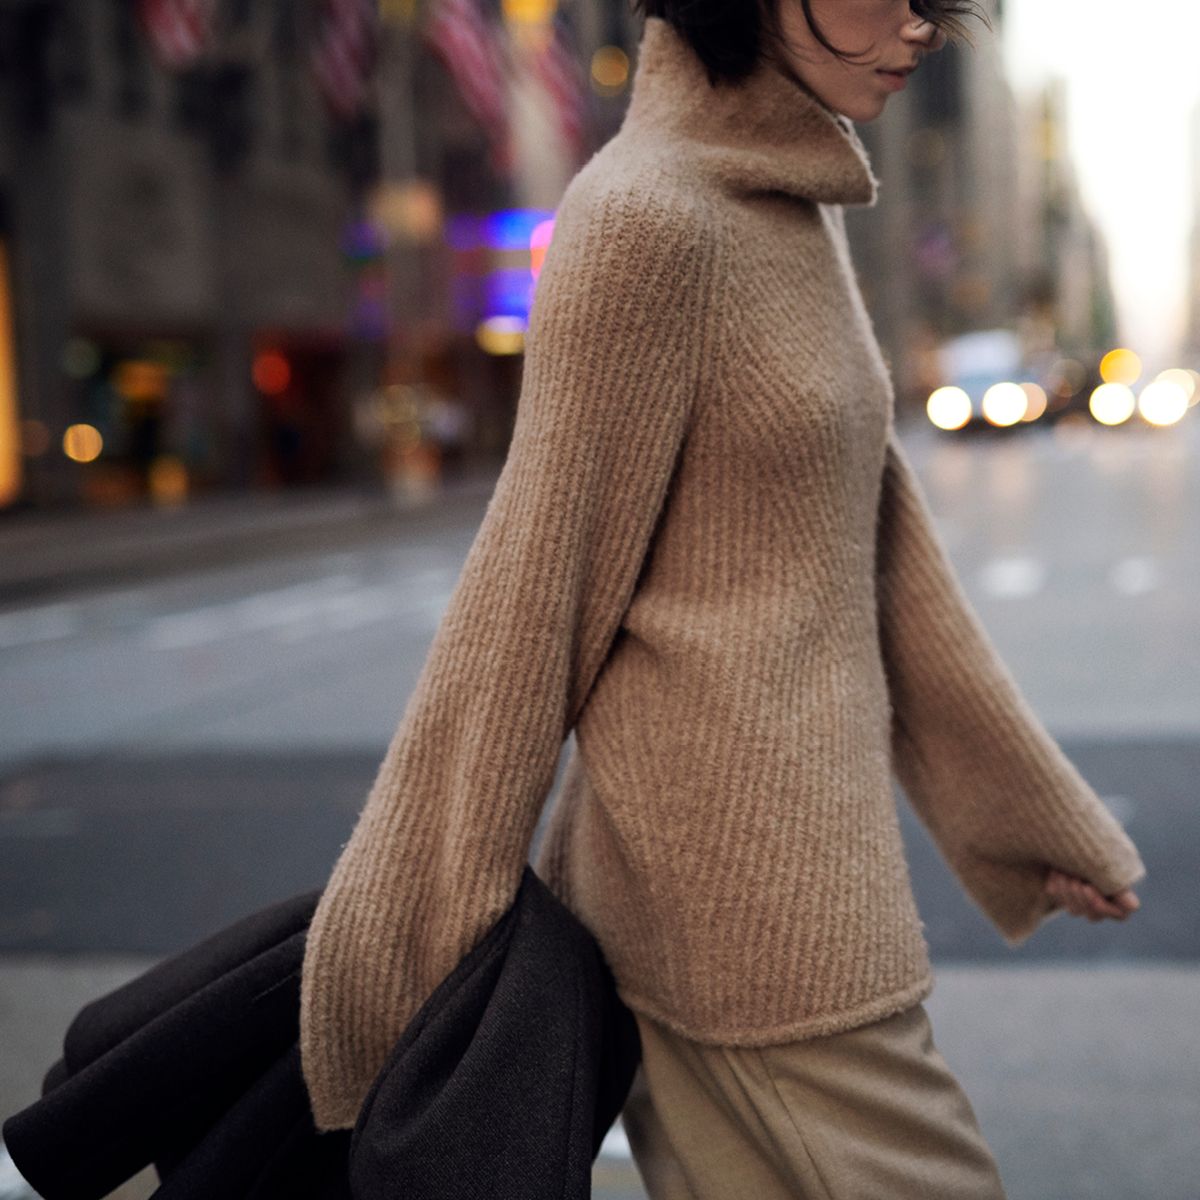 Moving Rib Turtleneck Sweater in Camel Boucle